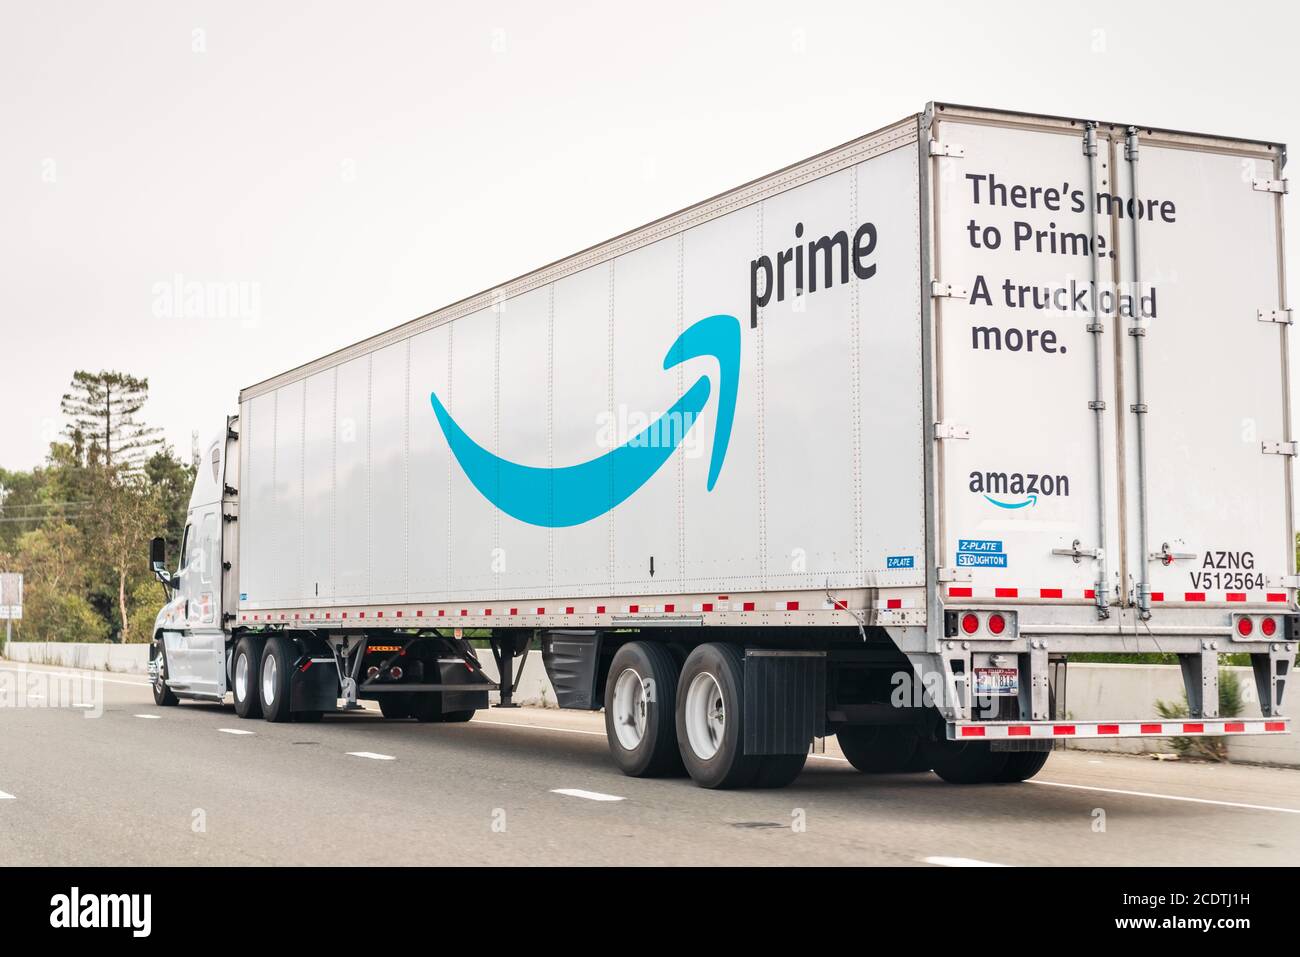 August 22 Fremont Ca Usa Amazon Truck Driving On The Freeway The Large Amazon Prime Smile Logo Printed On The Side Stock Photo Alamy